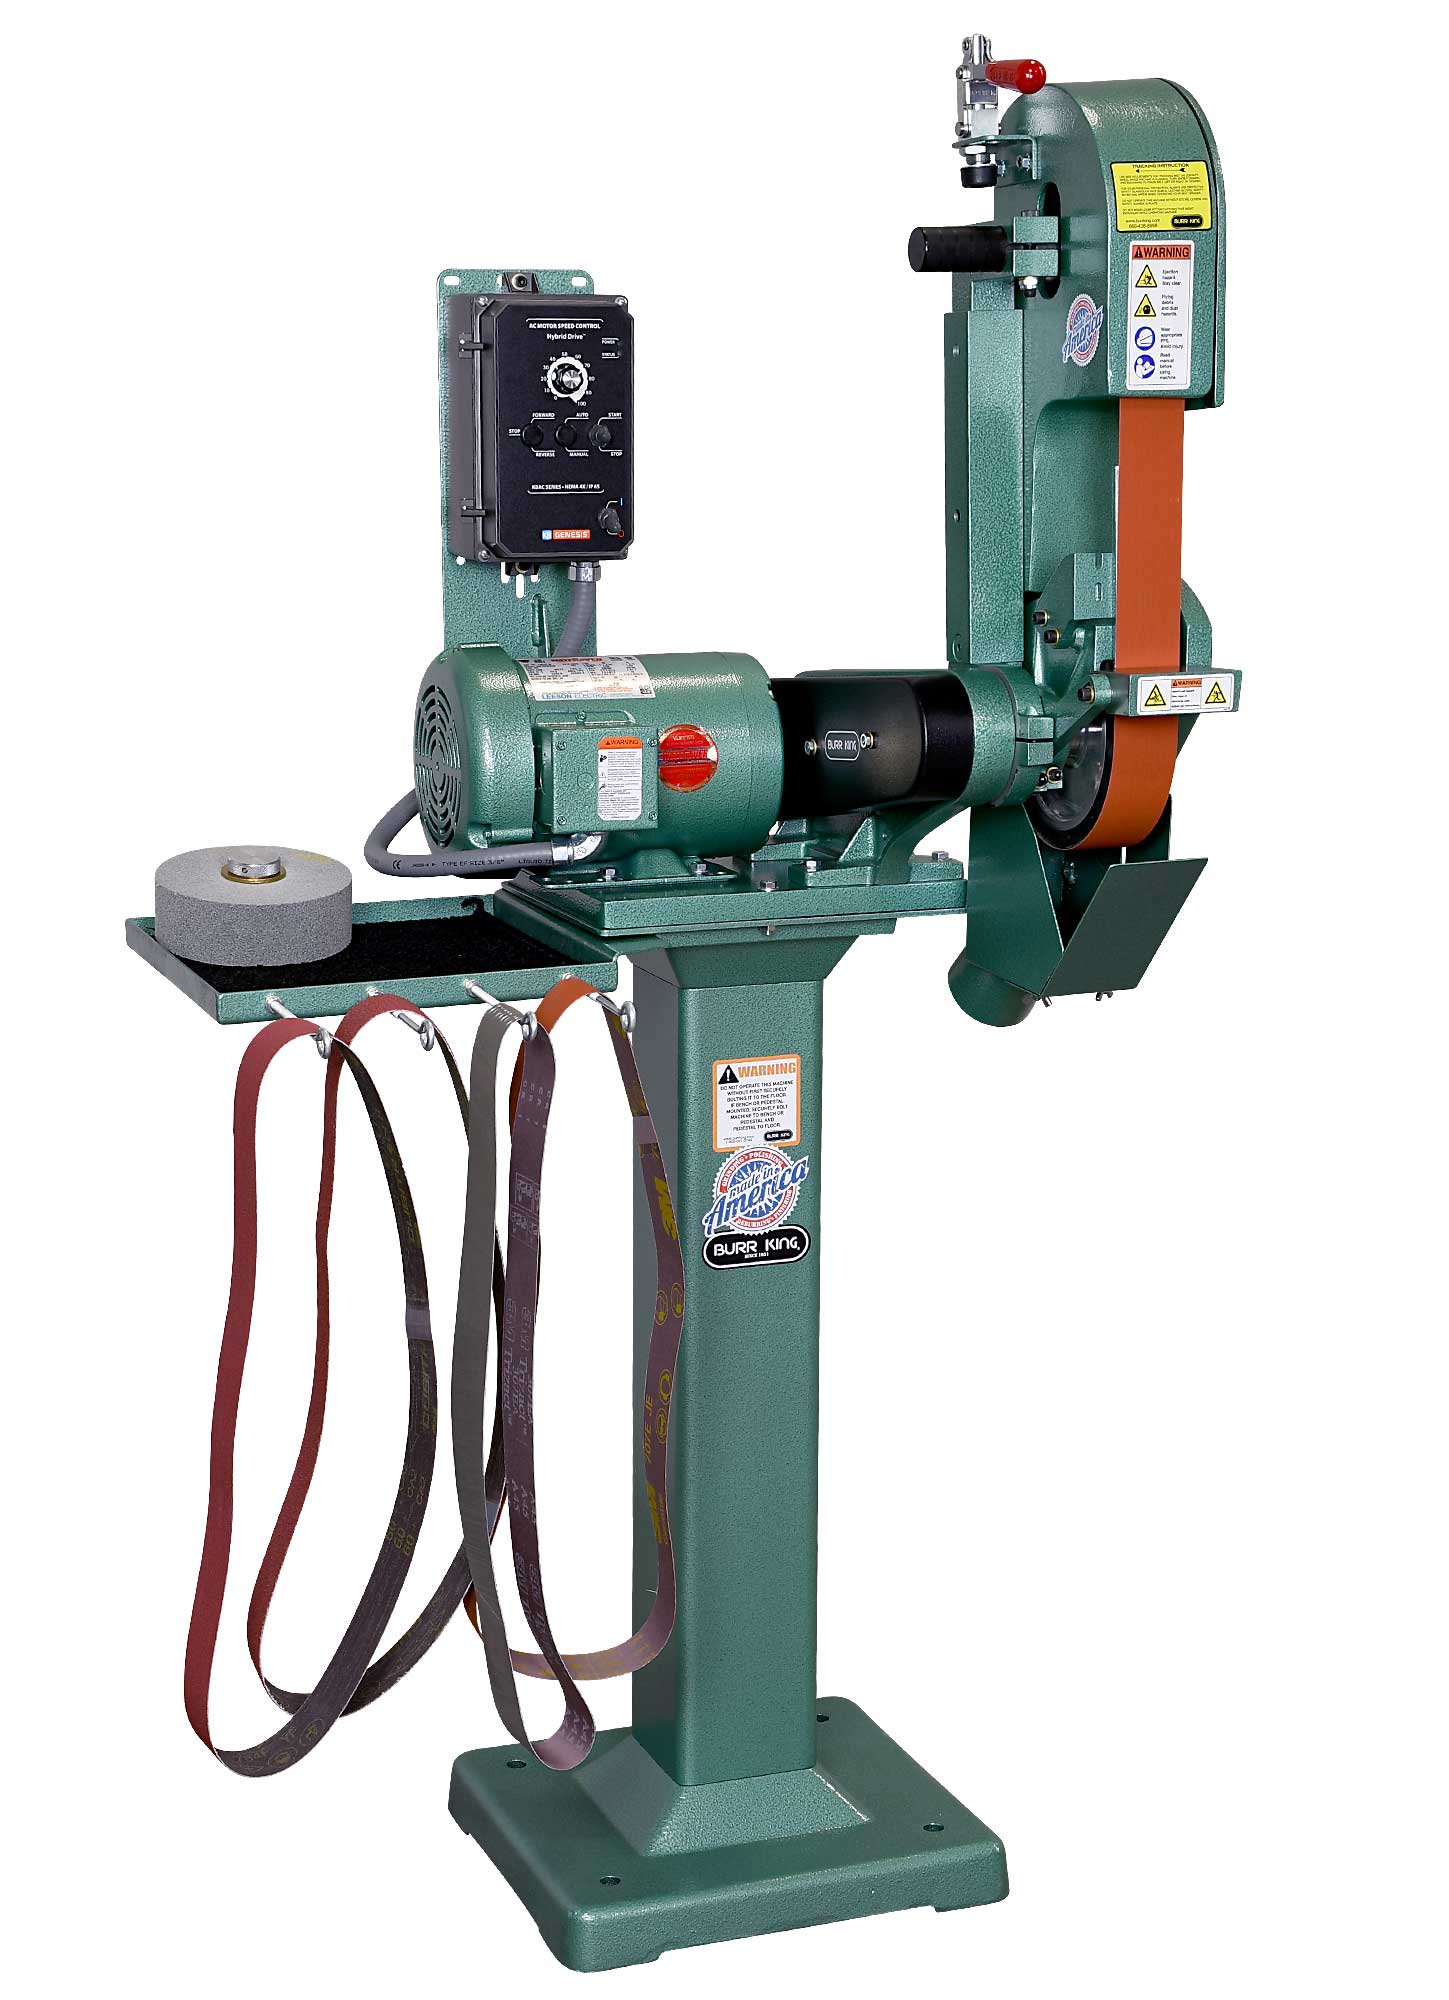 24821 - X400 variable speed belt grinder shown with optional 01 pedestal, 760T-2 tool tray and DS400-1 dust scoop.